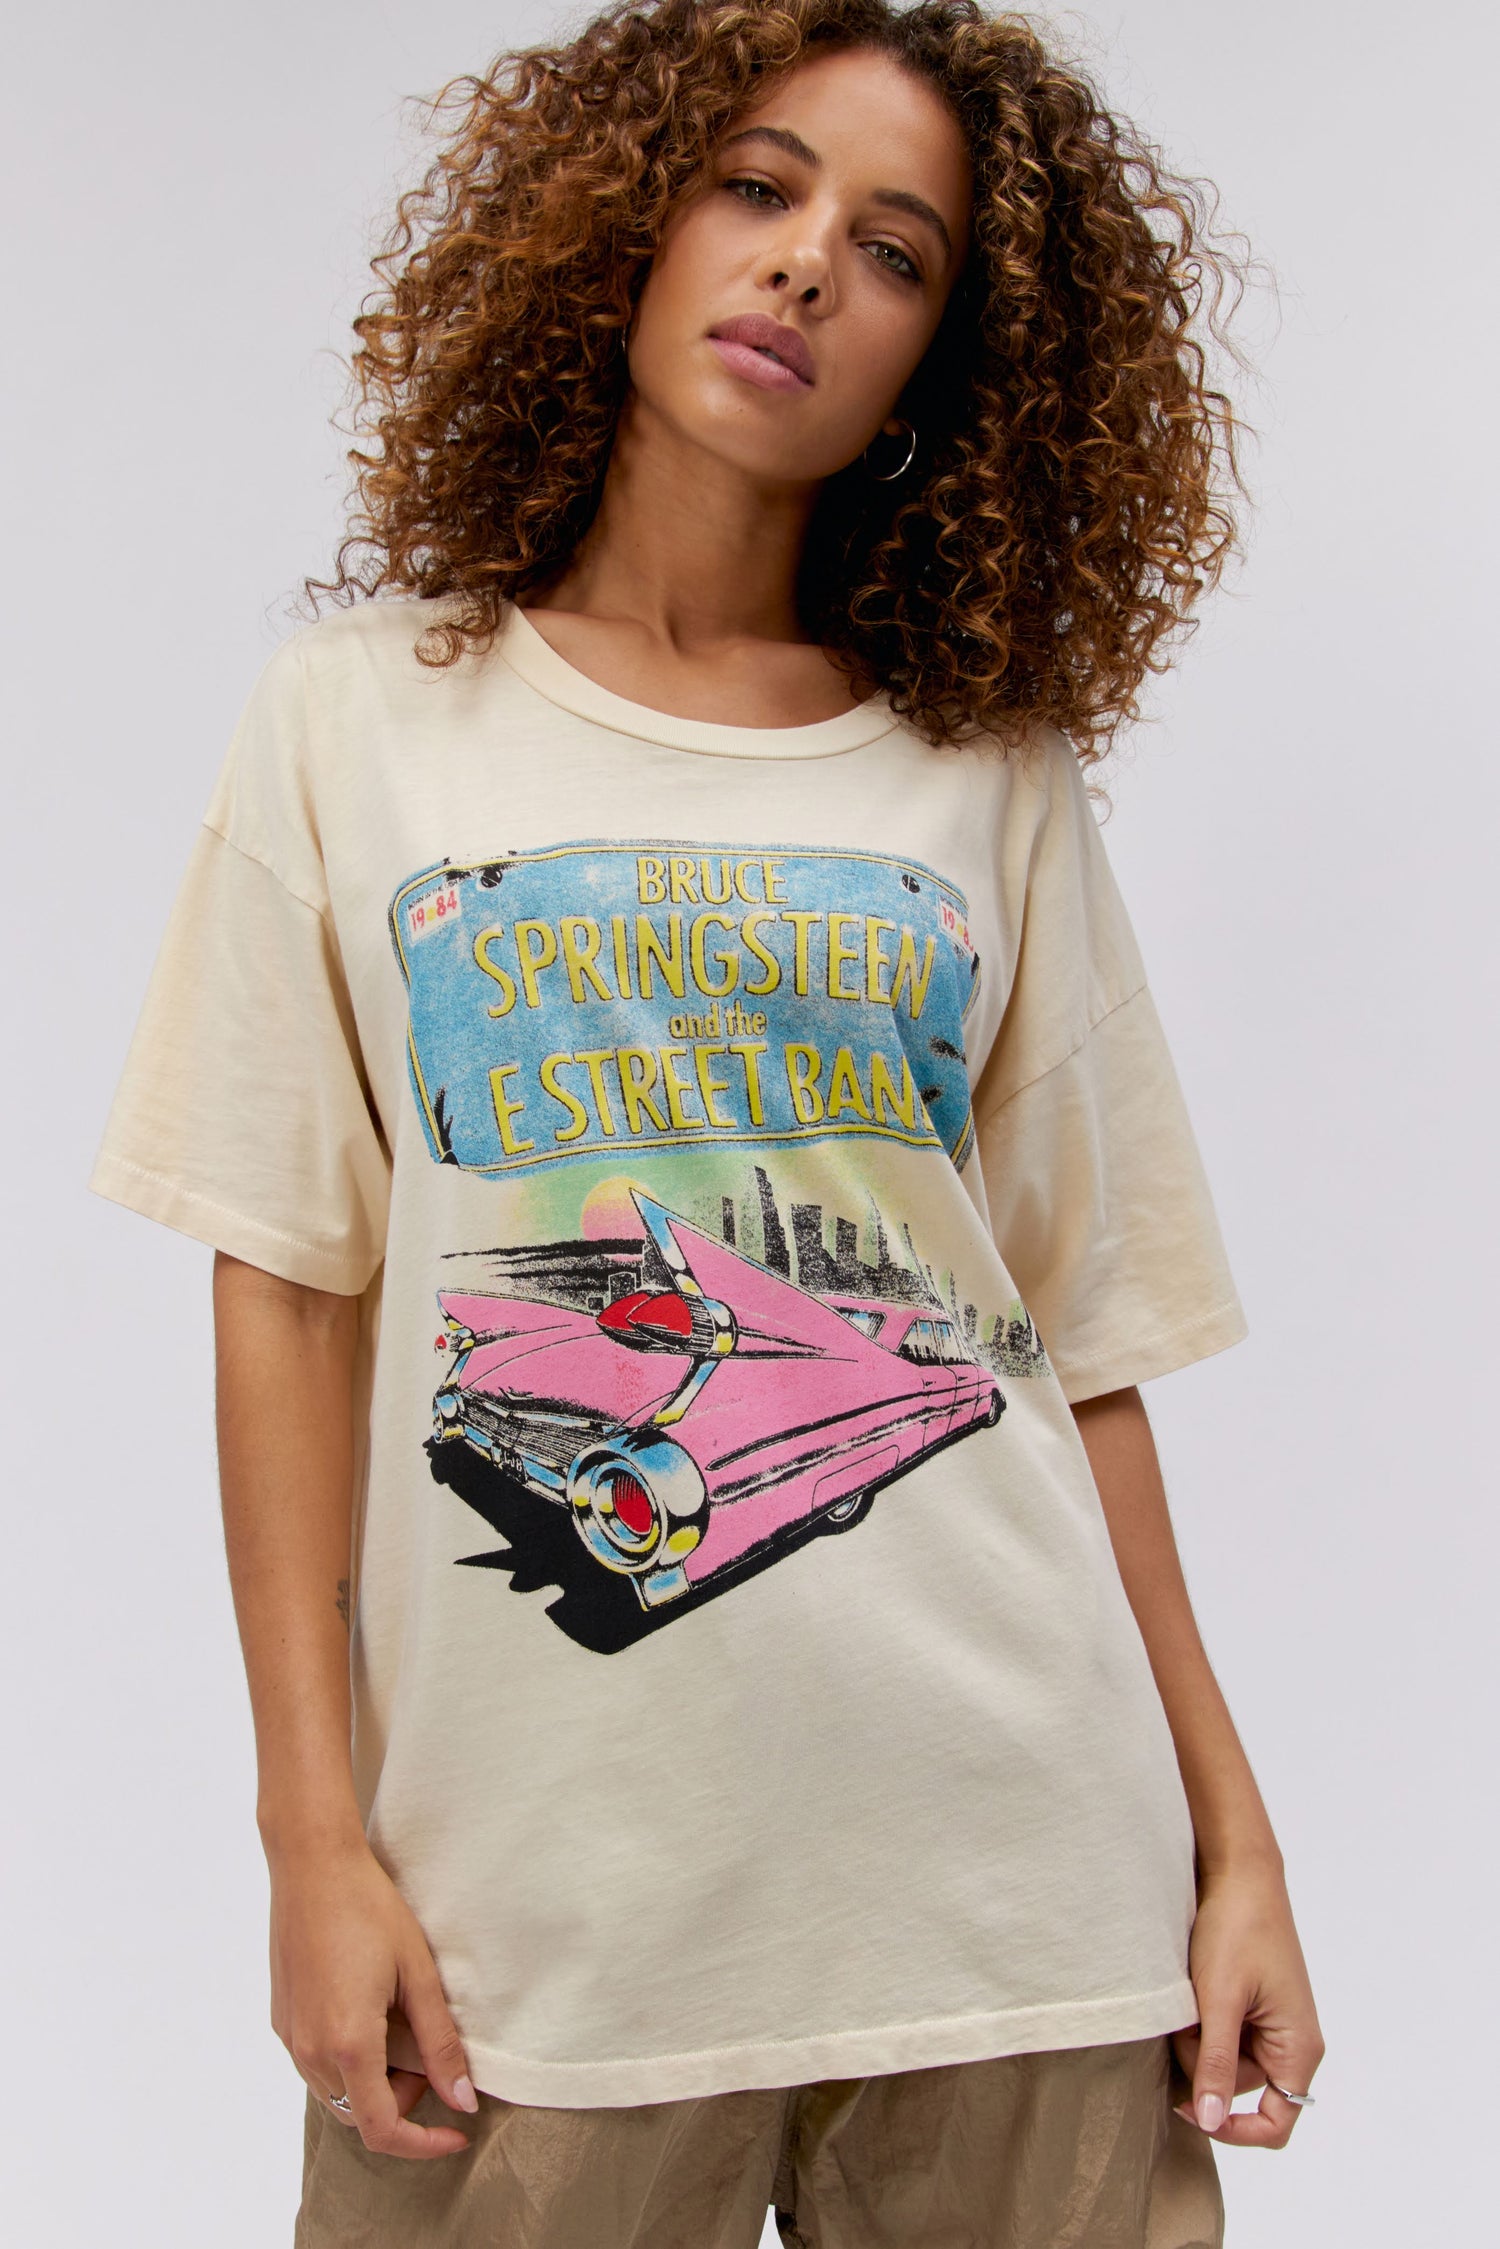 Model with Curly Hair wearing a Bruce Springsteen Graphic Tee